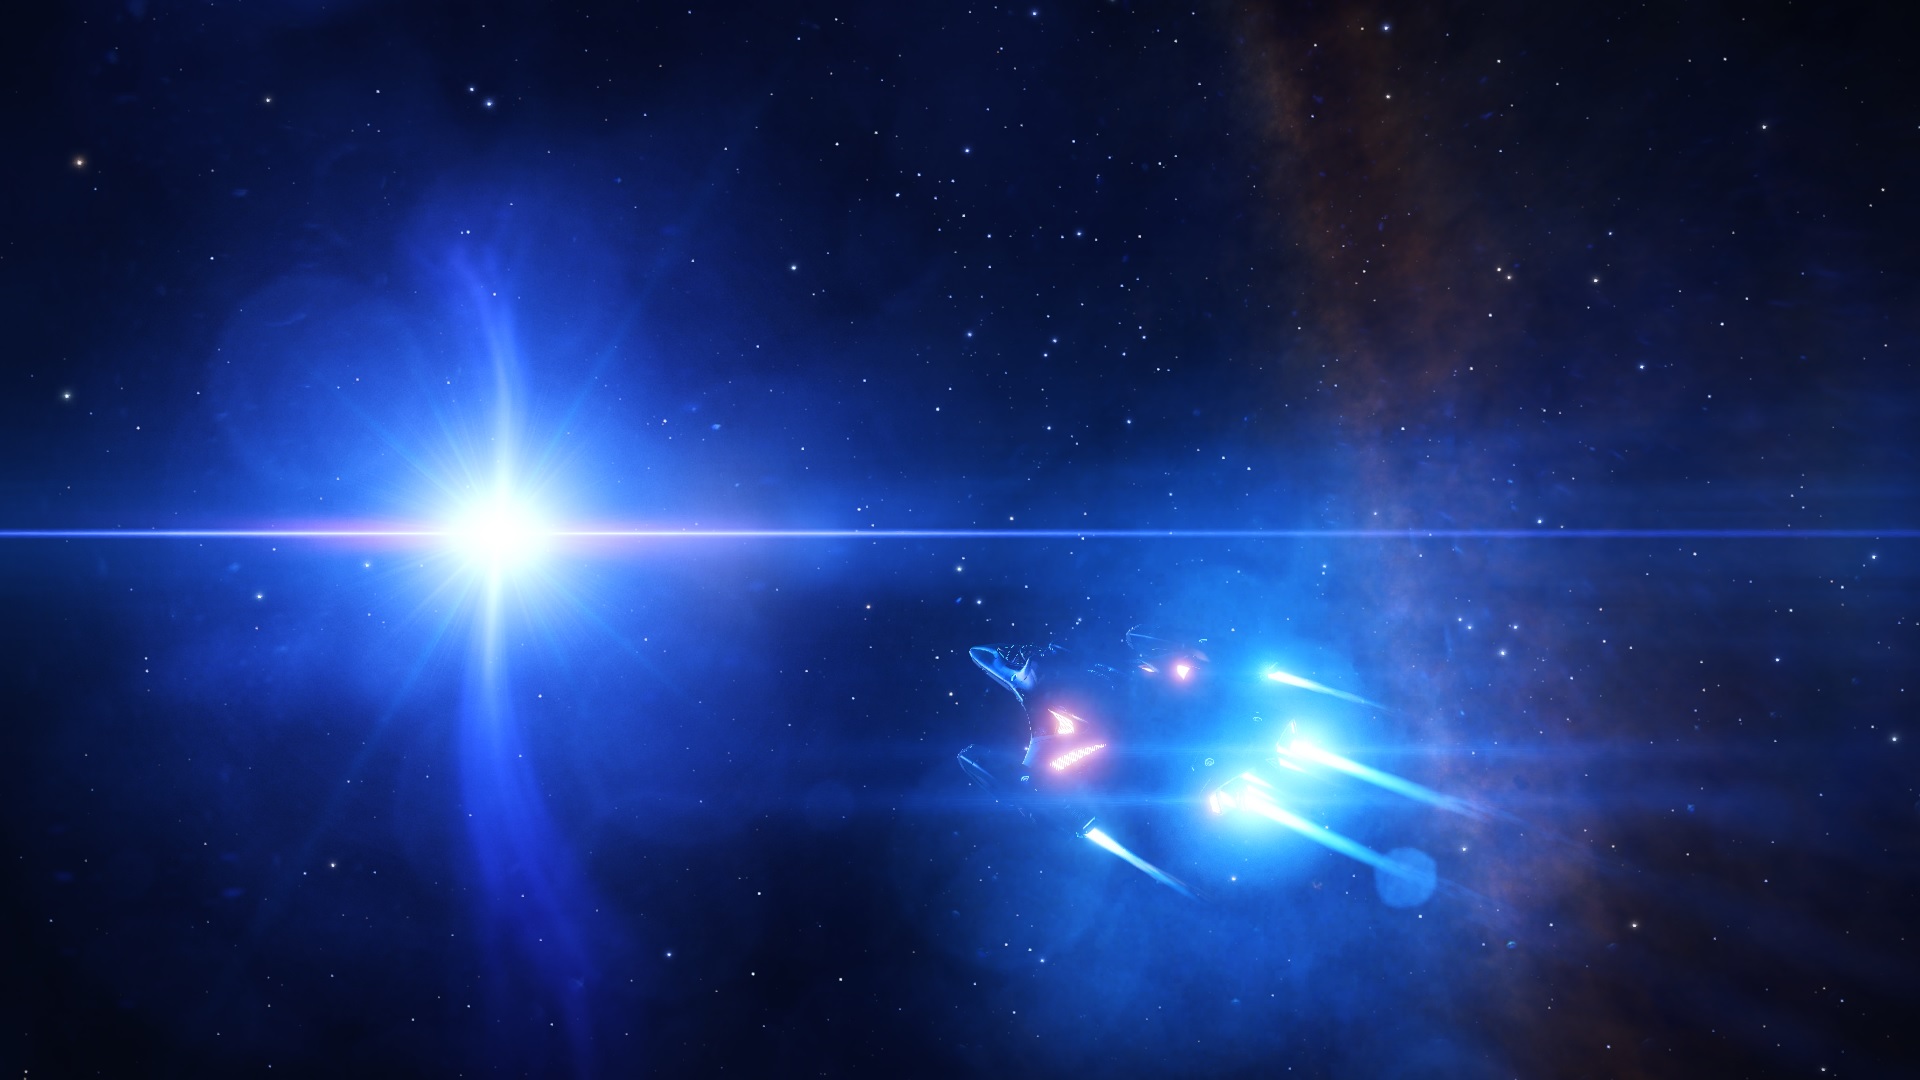 Imperial Courier by a white dwarf star